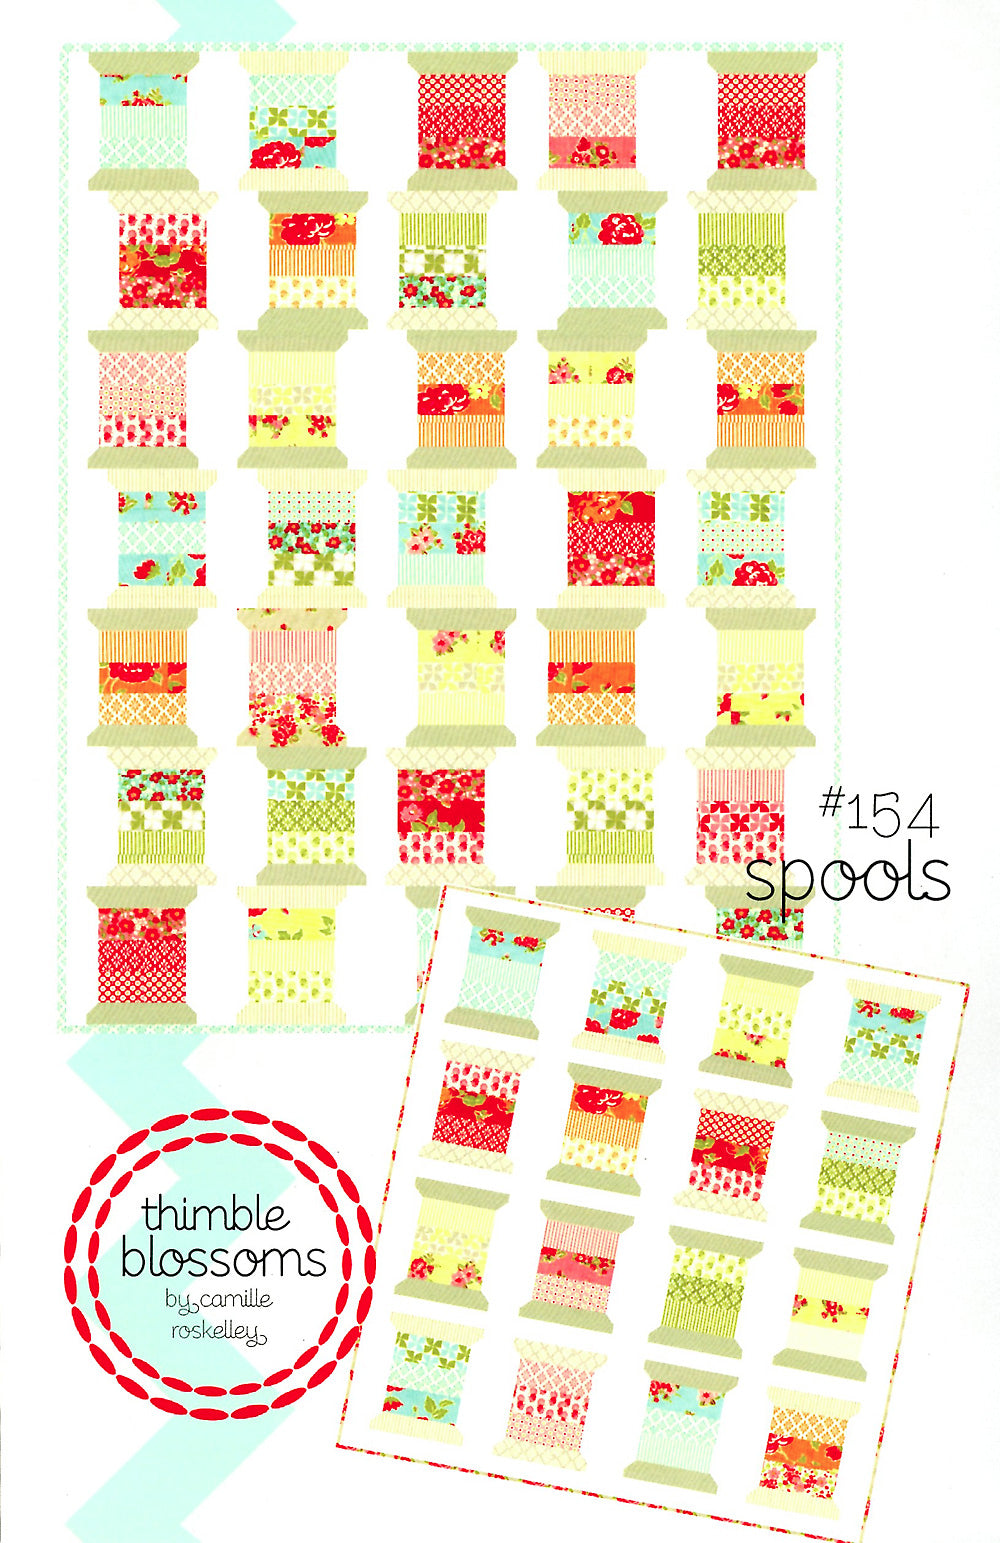 Spools Quilt Pattern by Camille Roskelley of Thimble Blossoms